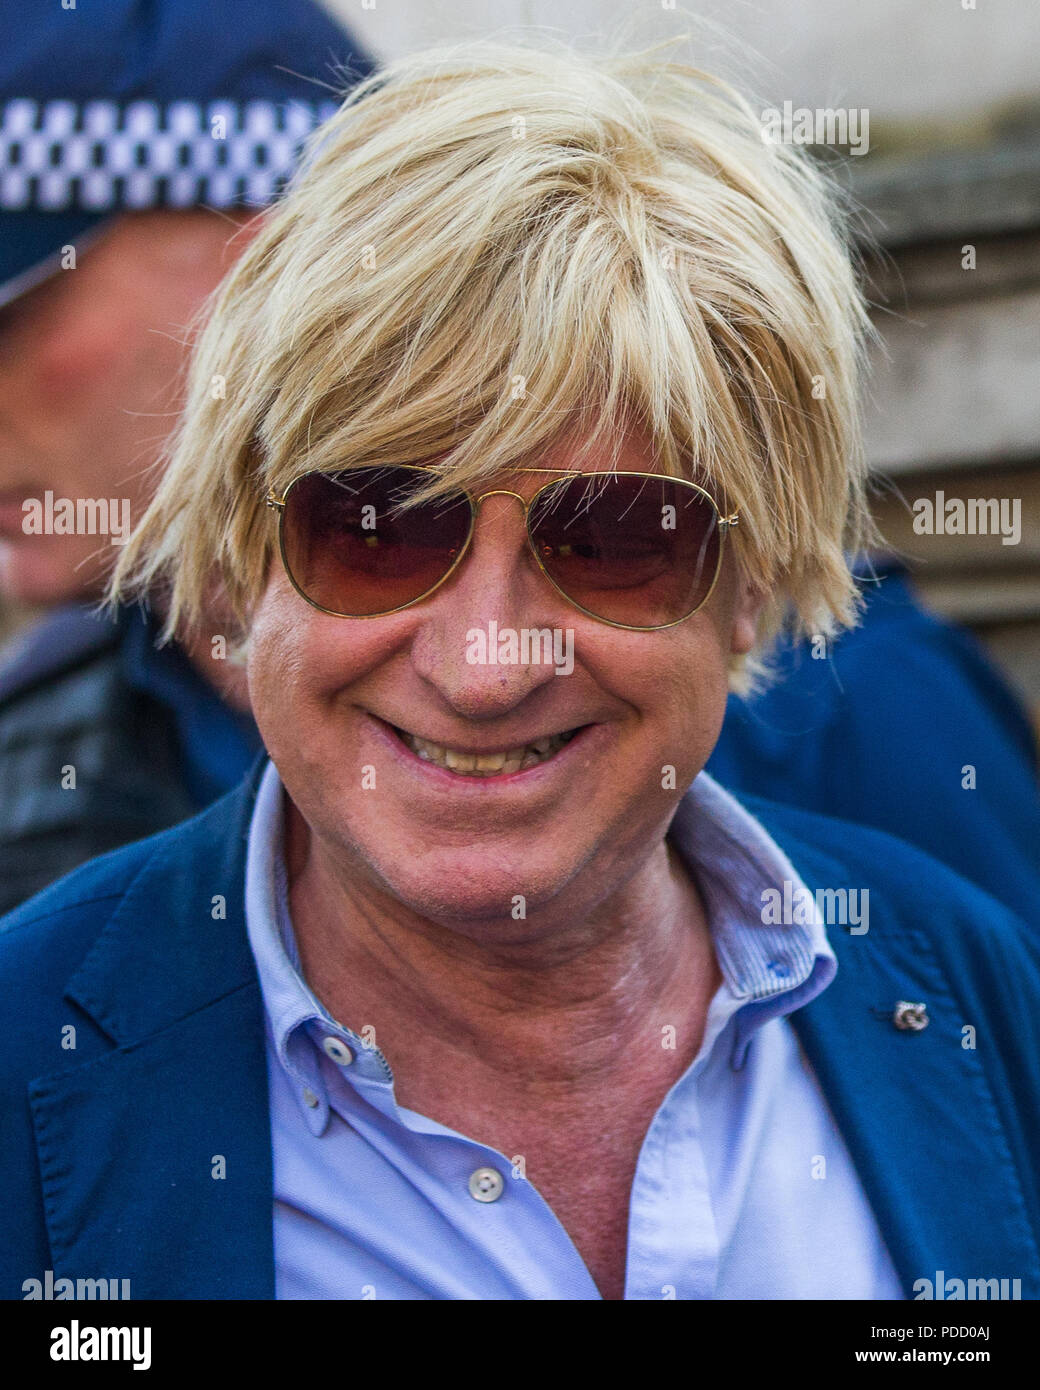 Conservative MP Michael Fabricant, seen here entering Downing Street, tweets challenge to US Embassy to use a US Marine to shoot down the Trump baby blimp due to fly during Trumps UK visit.    'I challenge @USAinUK to put a top US Marine marksman on the roof of the #fab new embassy to shoot down the stupid blimp of baby #Trump authorised by Sadiq Khan London Mayor.  1 shot’ll be enough! POW! @USAmbUK'  Featuring: Michael Fabricant MP Conservative Lichfield Where: London, England, United Kingdom When: 08 Jul 2018 Credit: Wheatley/WENN Stock Photo